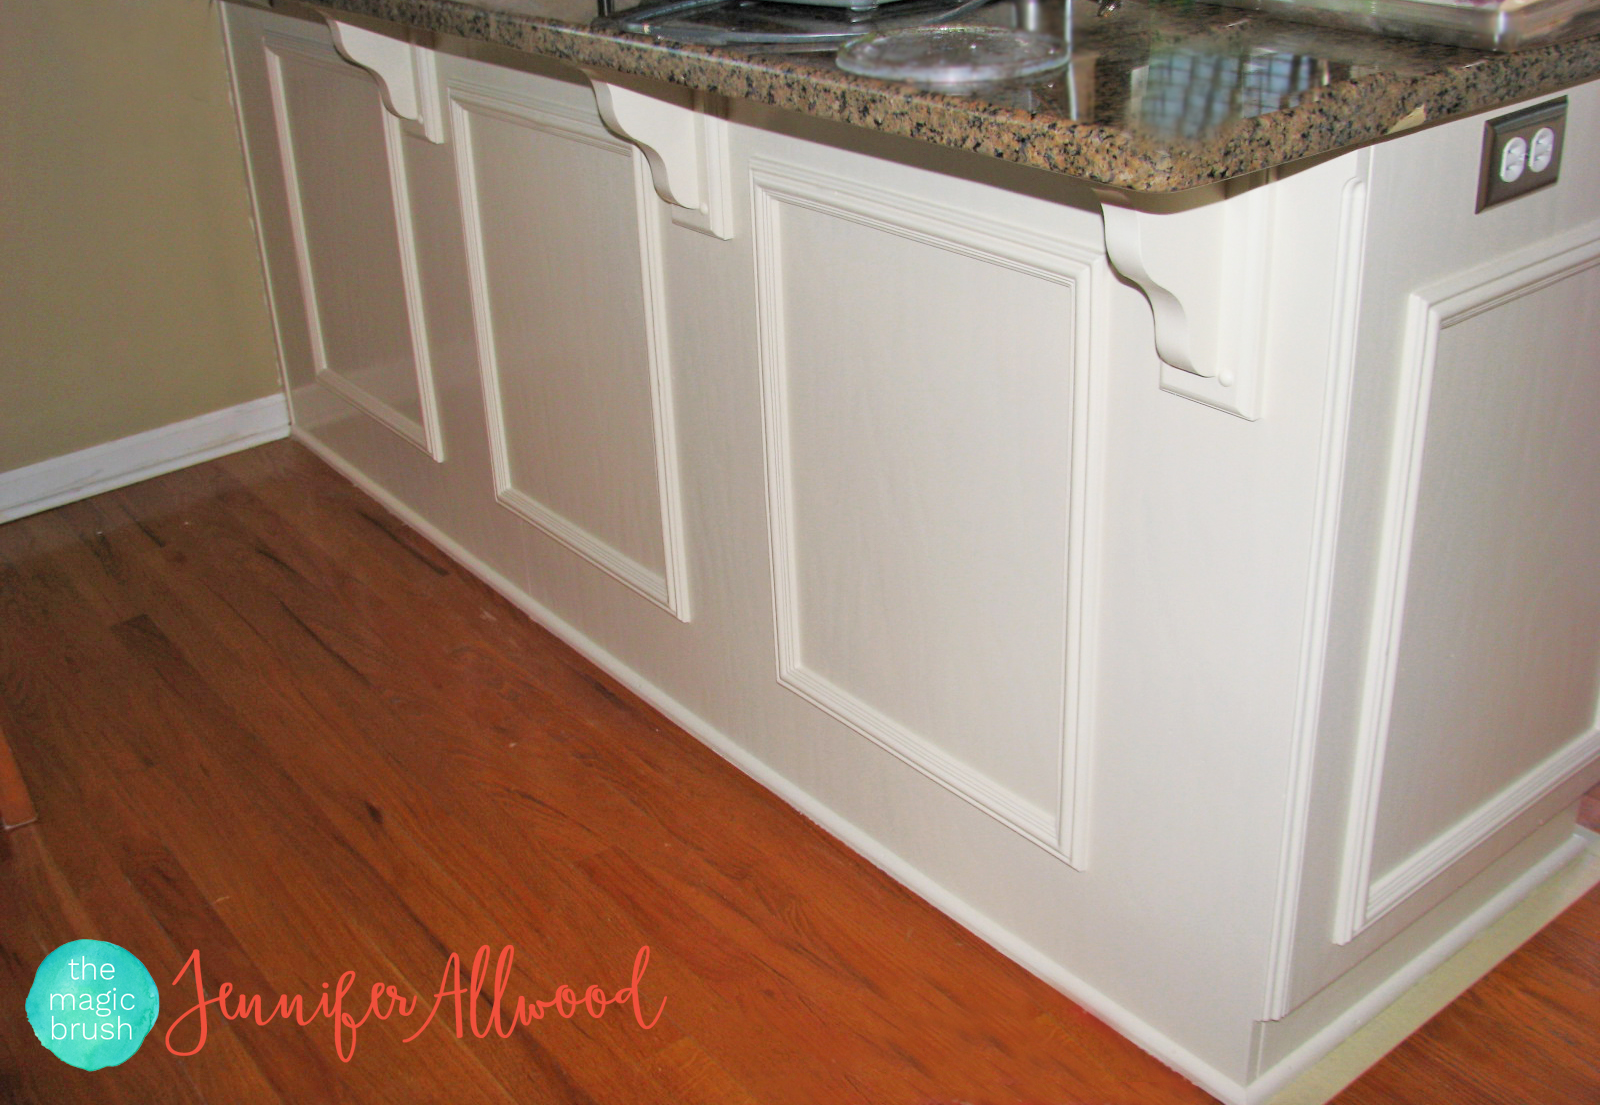 How to add panels to cabinet doors - Jennifer Allwood